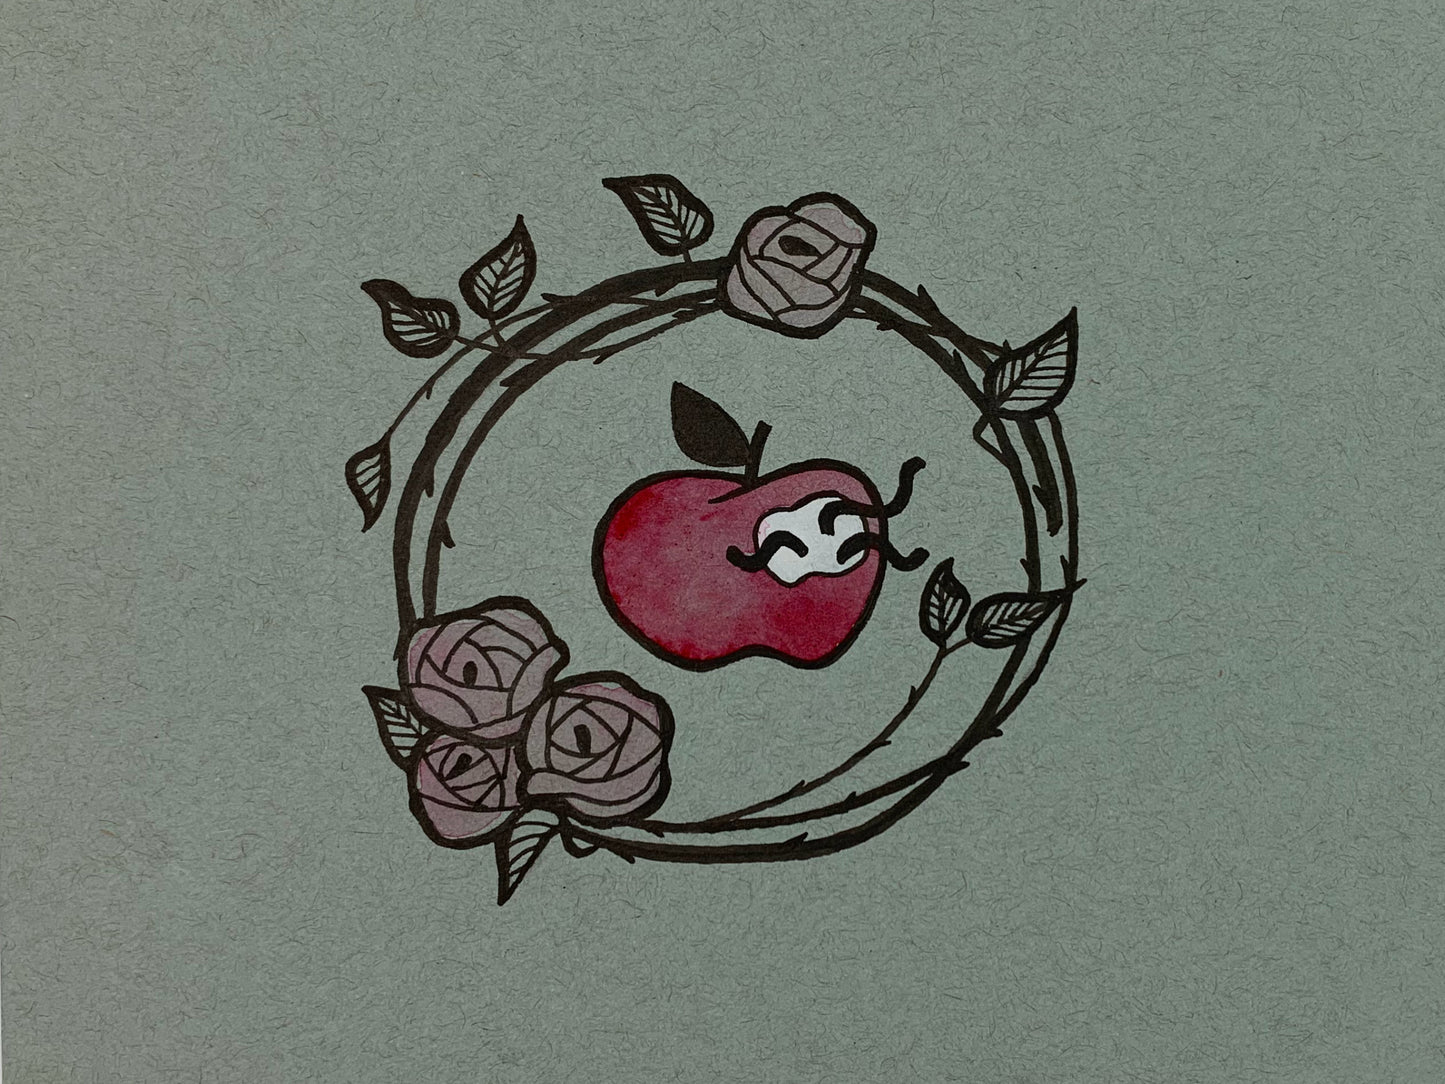 Original illustration of an apple with three little worms coming out of it that is surrounded by a wreath of rose vines. Made using ink, watercolor, and gouache.